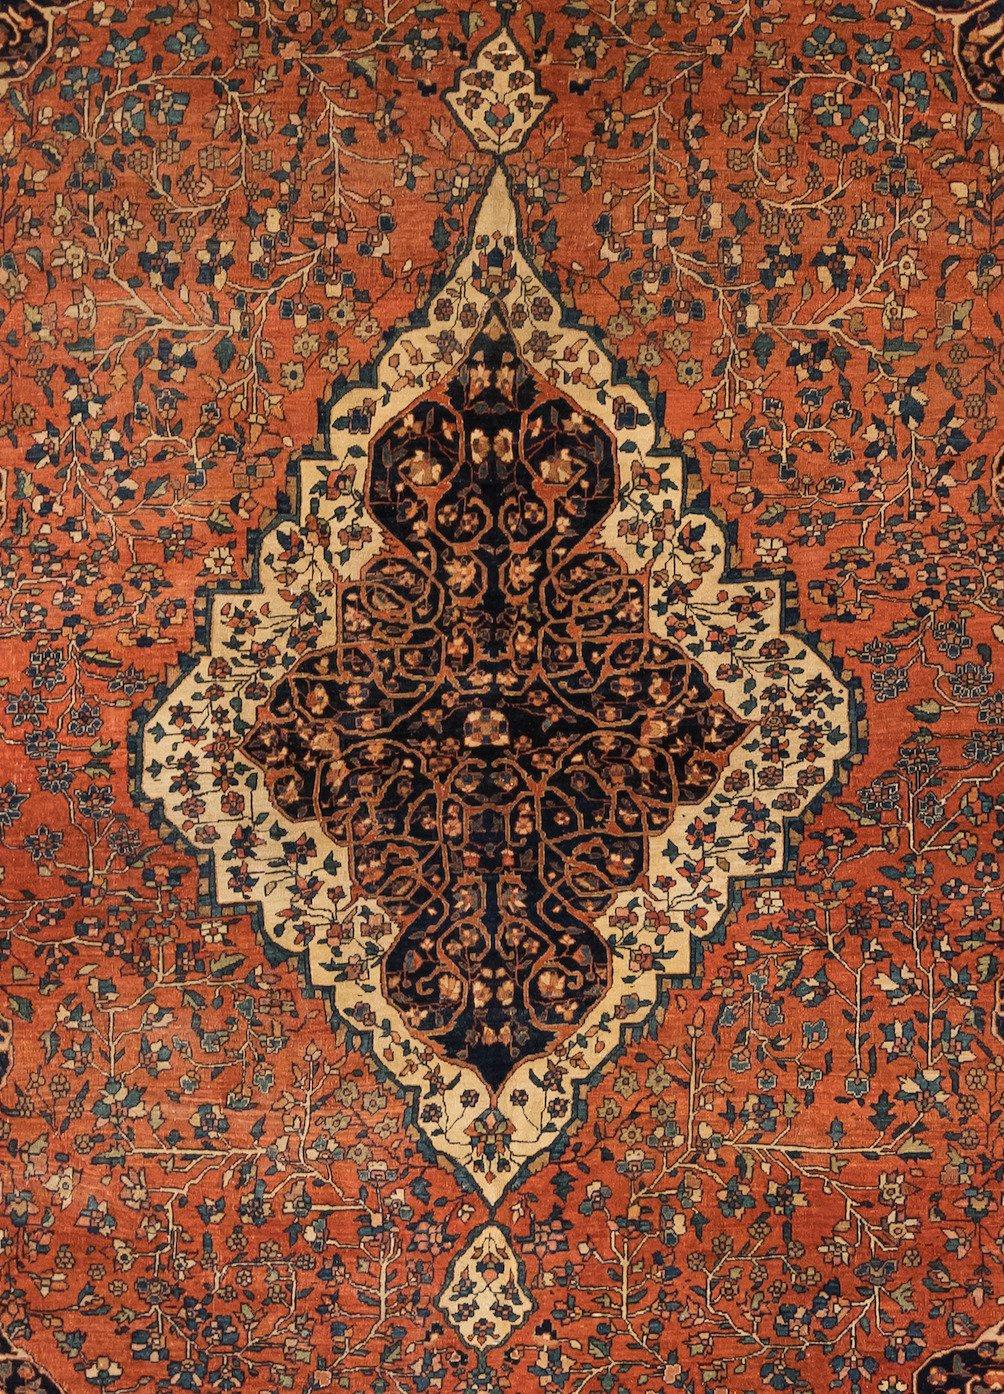 Sarouk rugs, the thickness of the luxurious pile allows Sarouk rugs to withstand the level of foot traffic that would be typical in hallways, common rooms and foyers. Antique carpets produced in Sarouk feature classic curvilinear vinescrolls and